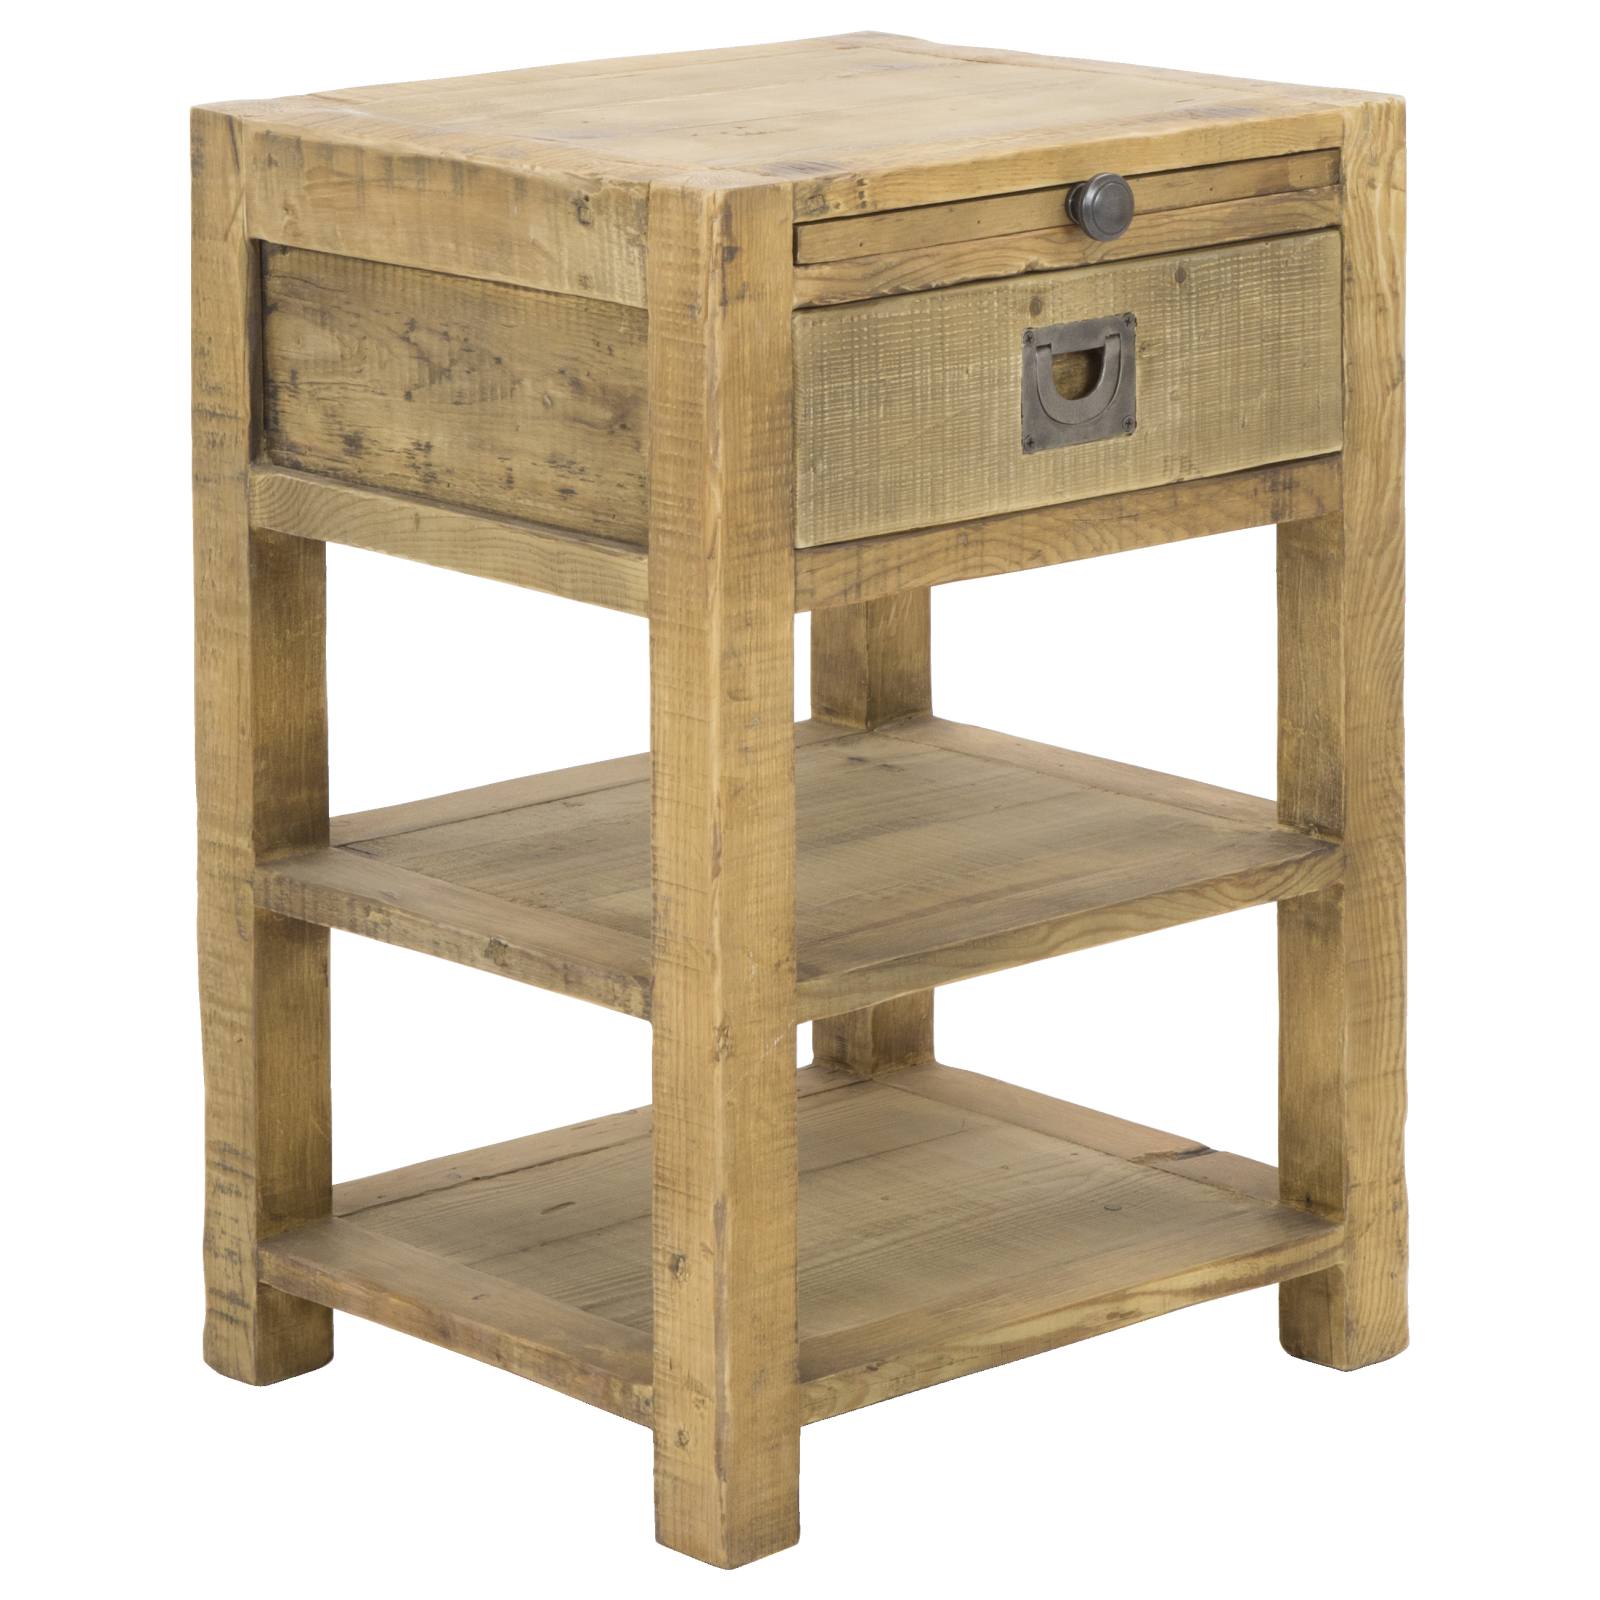 Hadley Pine Bedside Table w/ Top Drawer, Natural